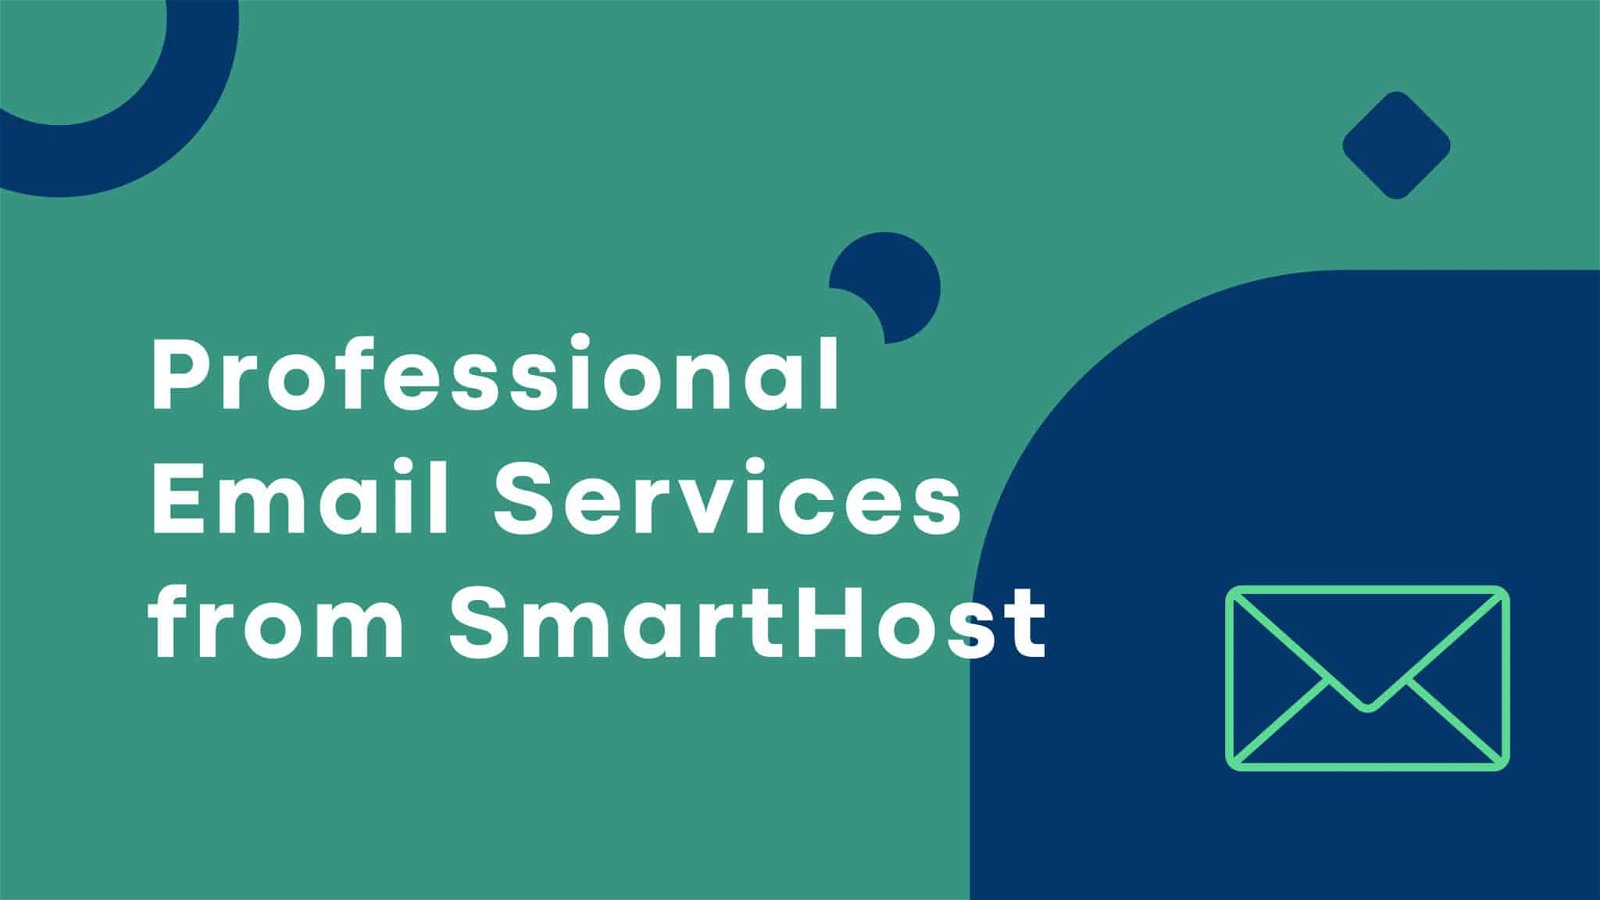 This image is showing the availability of professional email services from SmartHost.